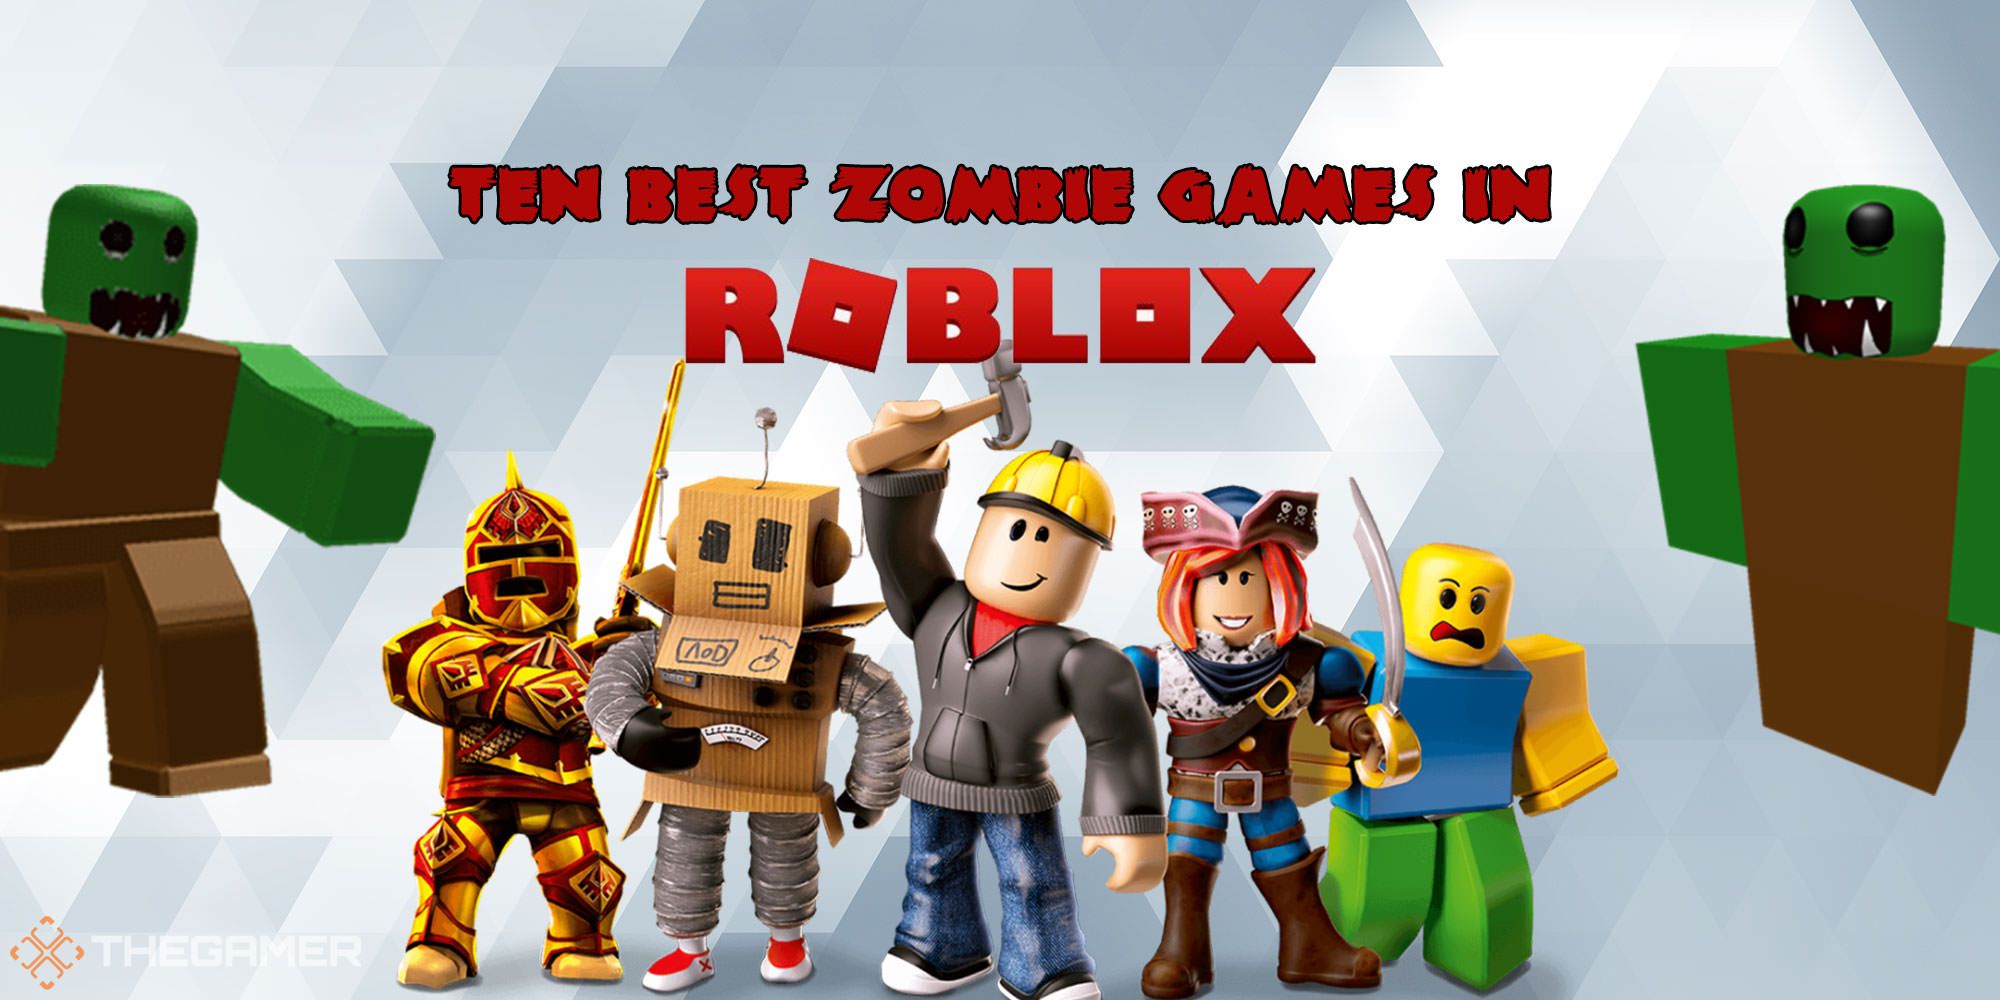 Roblox 10 Best Zombie Games - codes for zombie attack roblox